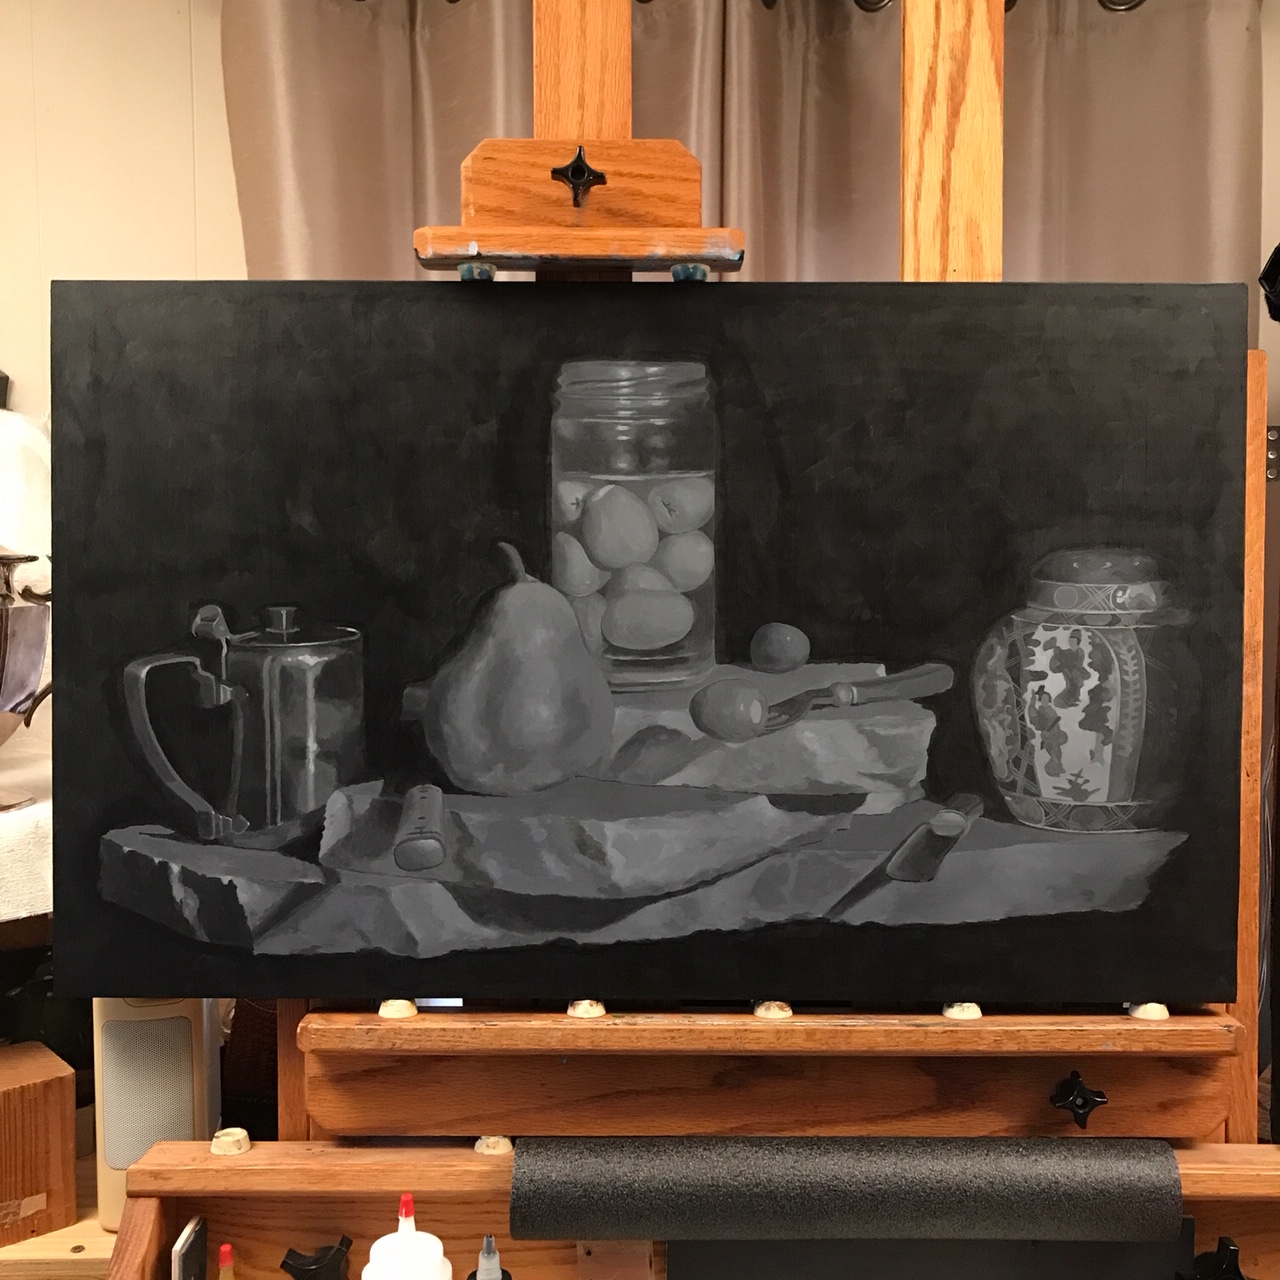 A completed grisaille for a larger painting